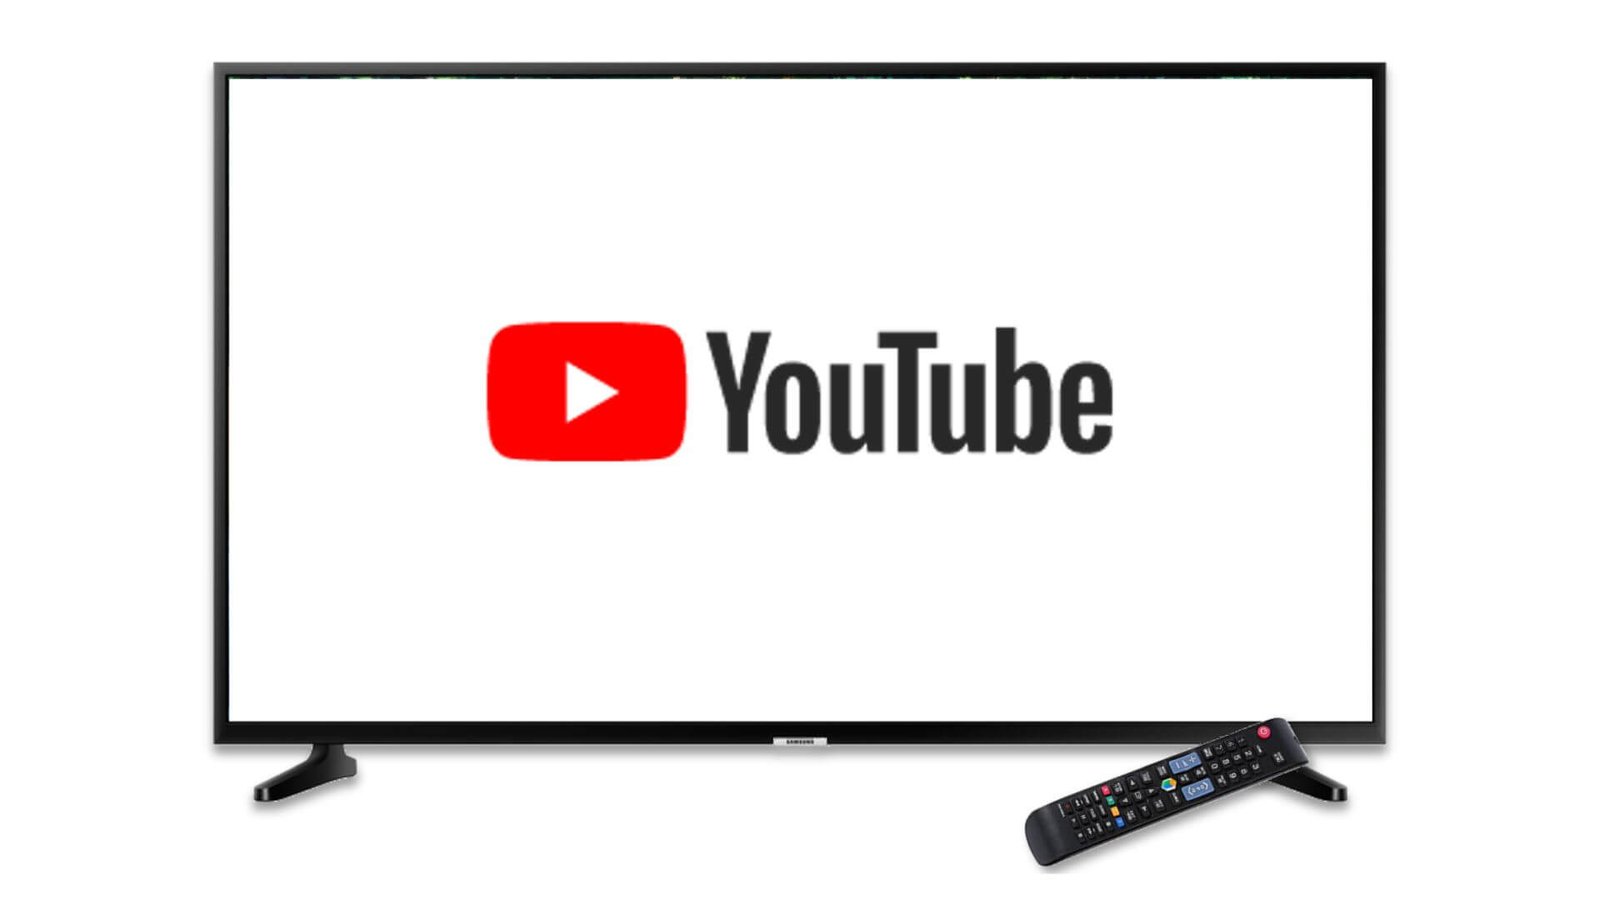 Google Enhances YouTube Monetization with Pause Screen Ads on Connected TVs